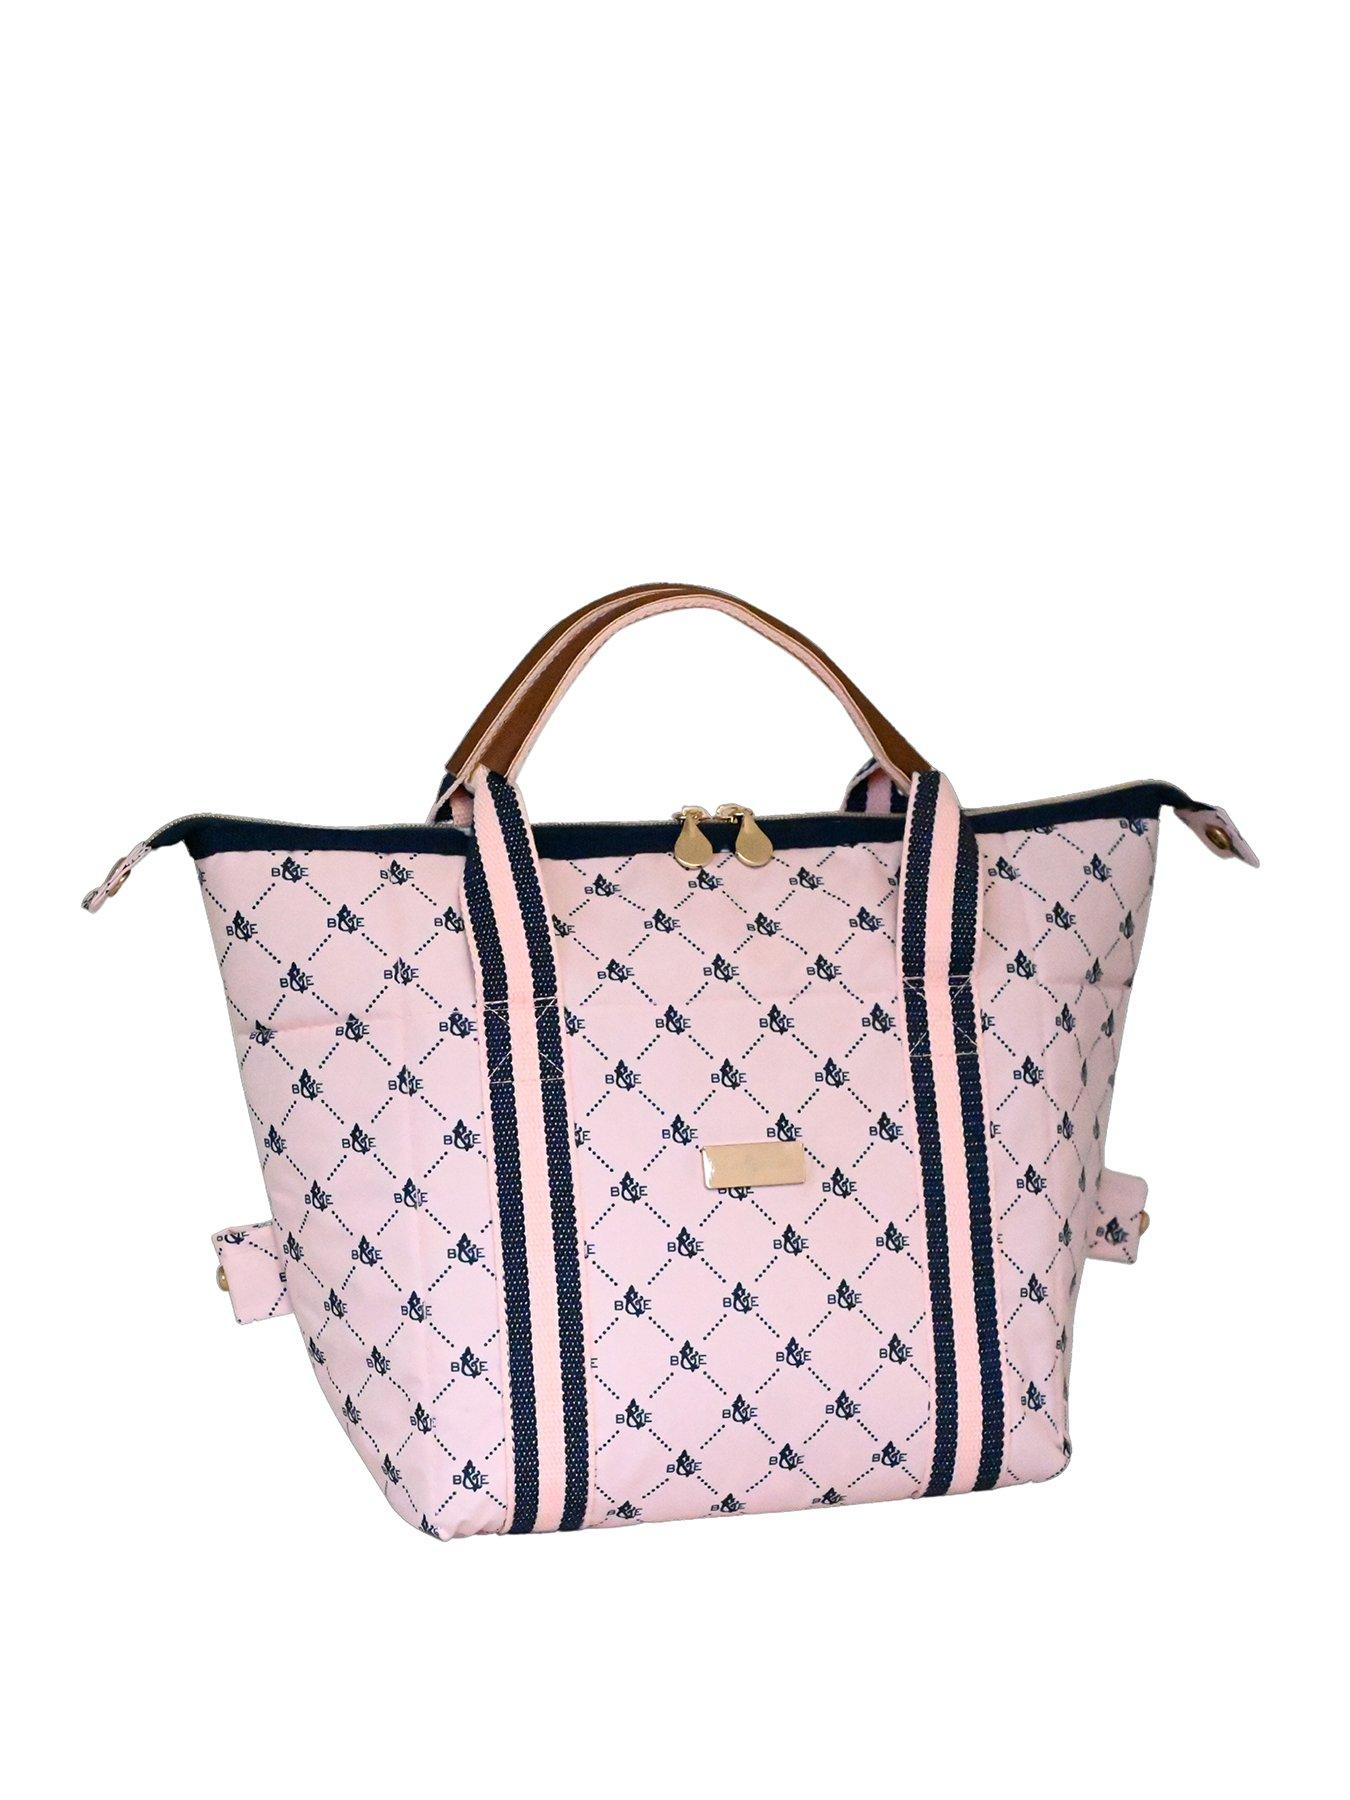 Beau & Elliot Monogram Logo Convertible Insulated Tote Lunch Bag, Pink